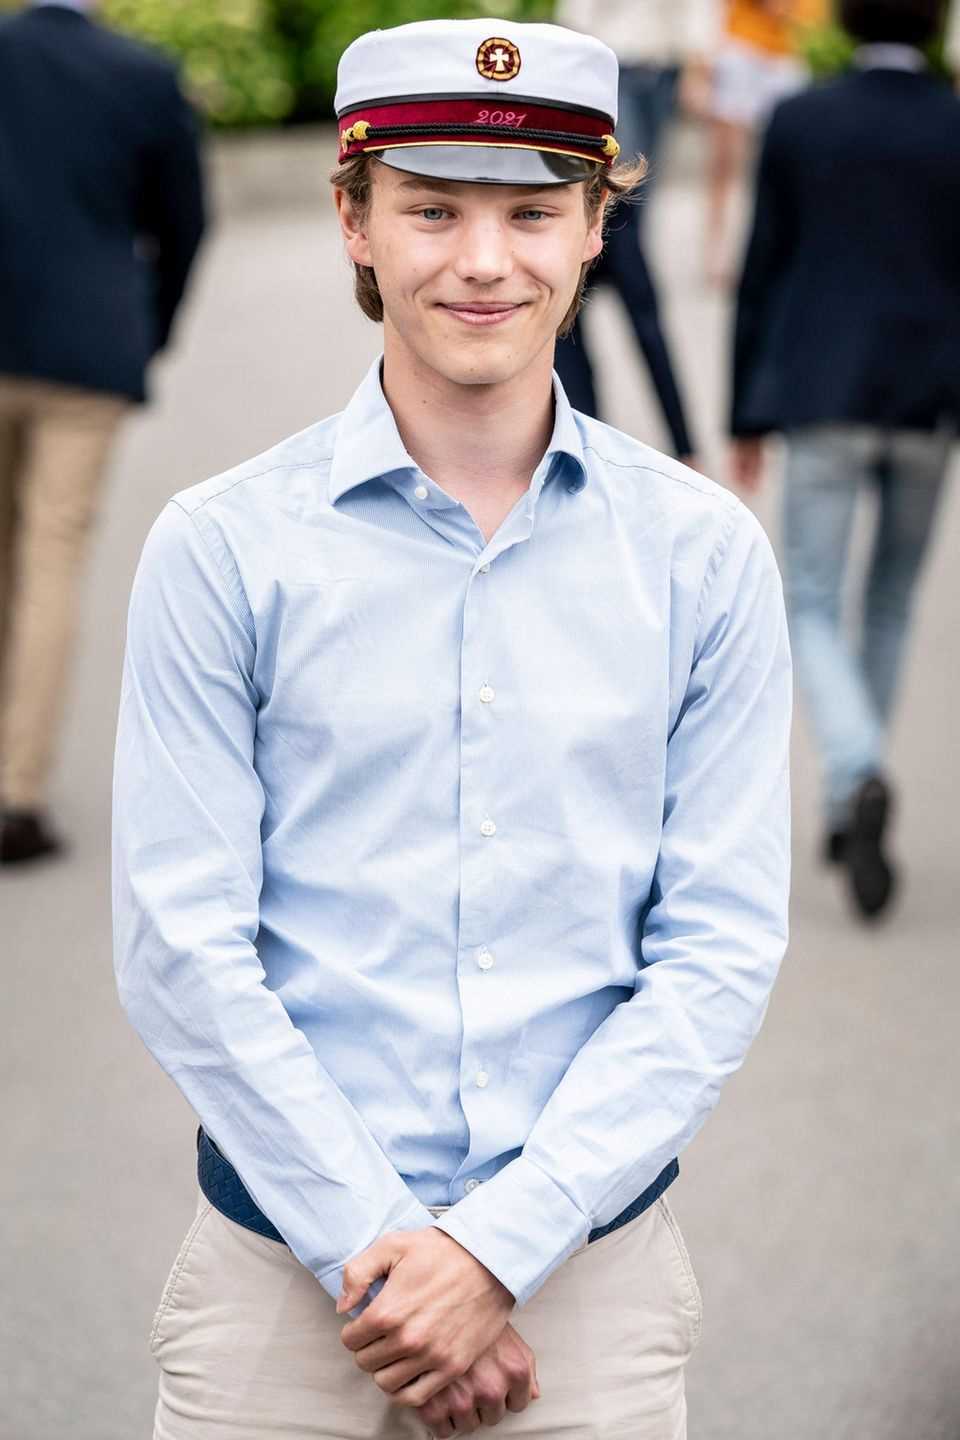 After graduating from high school in spring 2021 and after a well-deserved summer vacation in France, Prince Felix appropriately moved to the military.  But after only four weeks on duty, Prince Frederik's nephew gave up training.